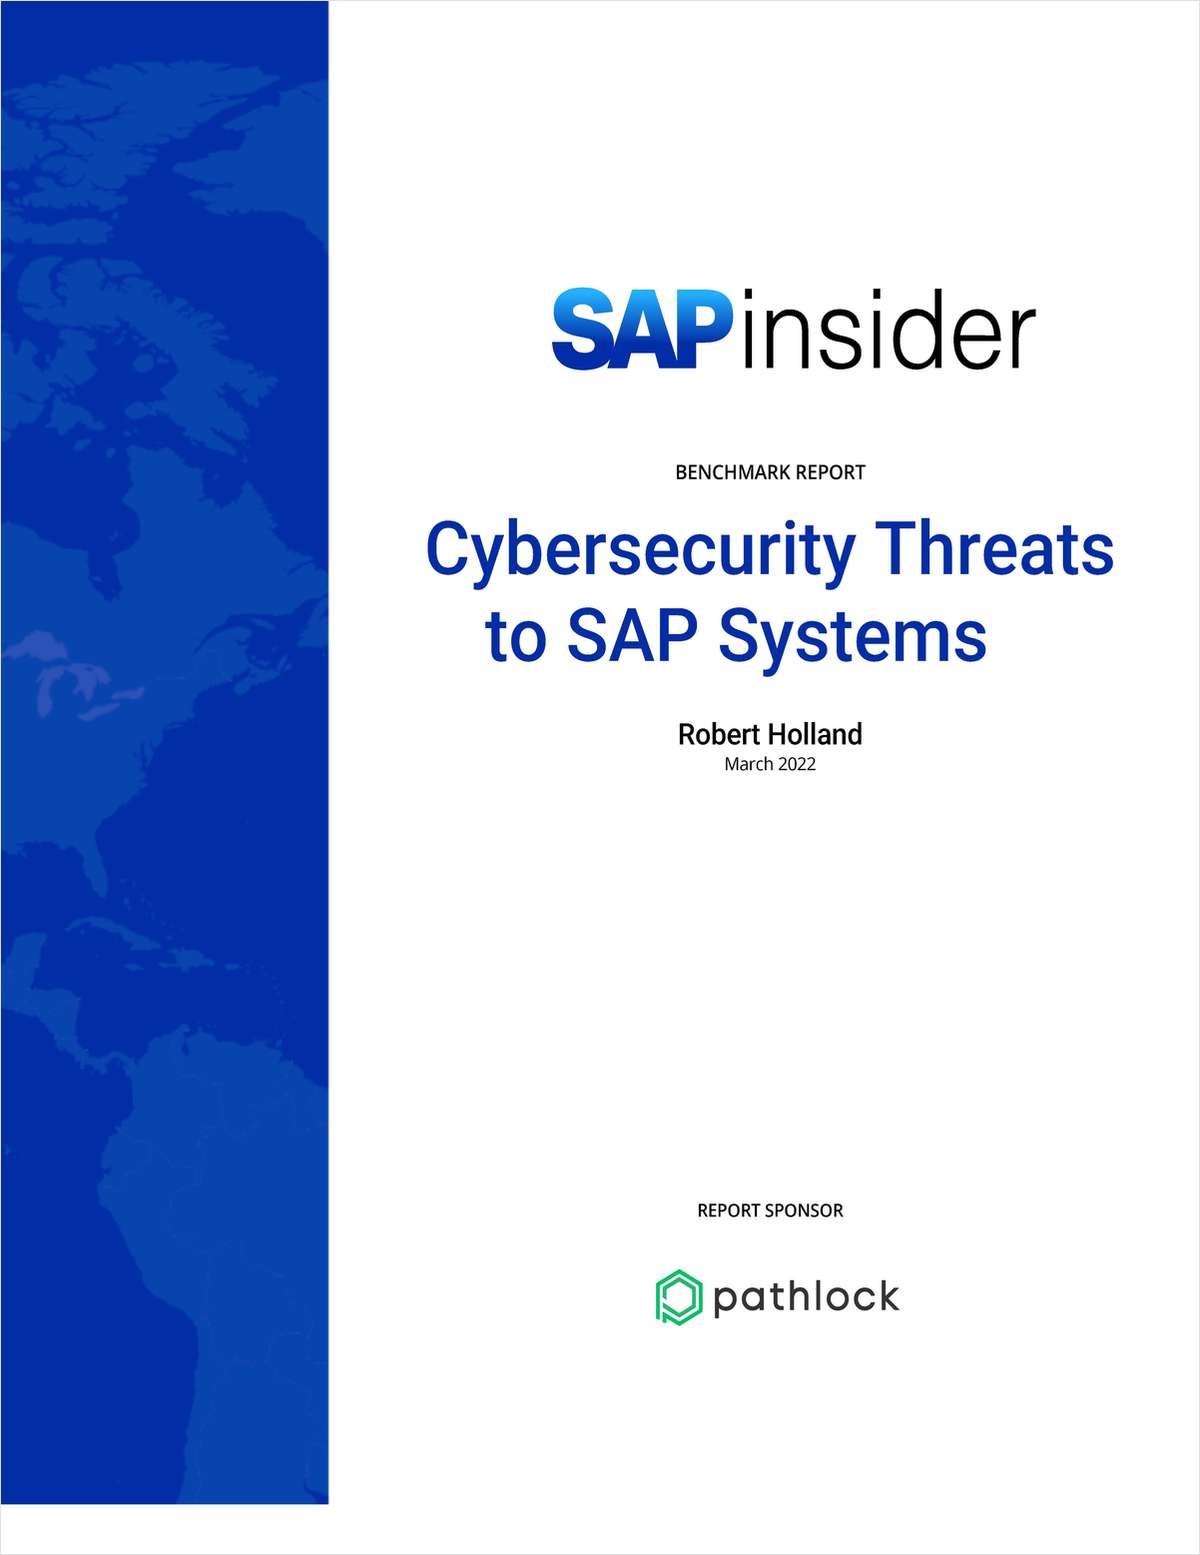 SAPinsider Benchmark Report -- Cybersecurity Threats to SAP Systems